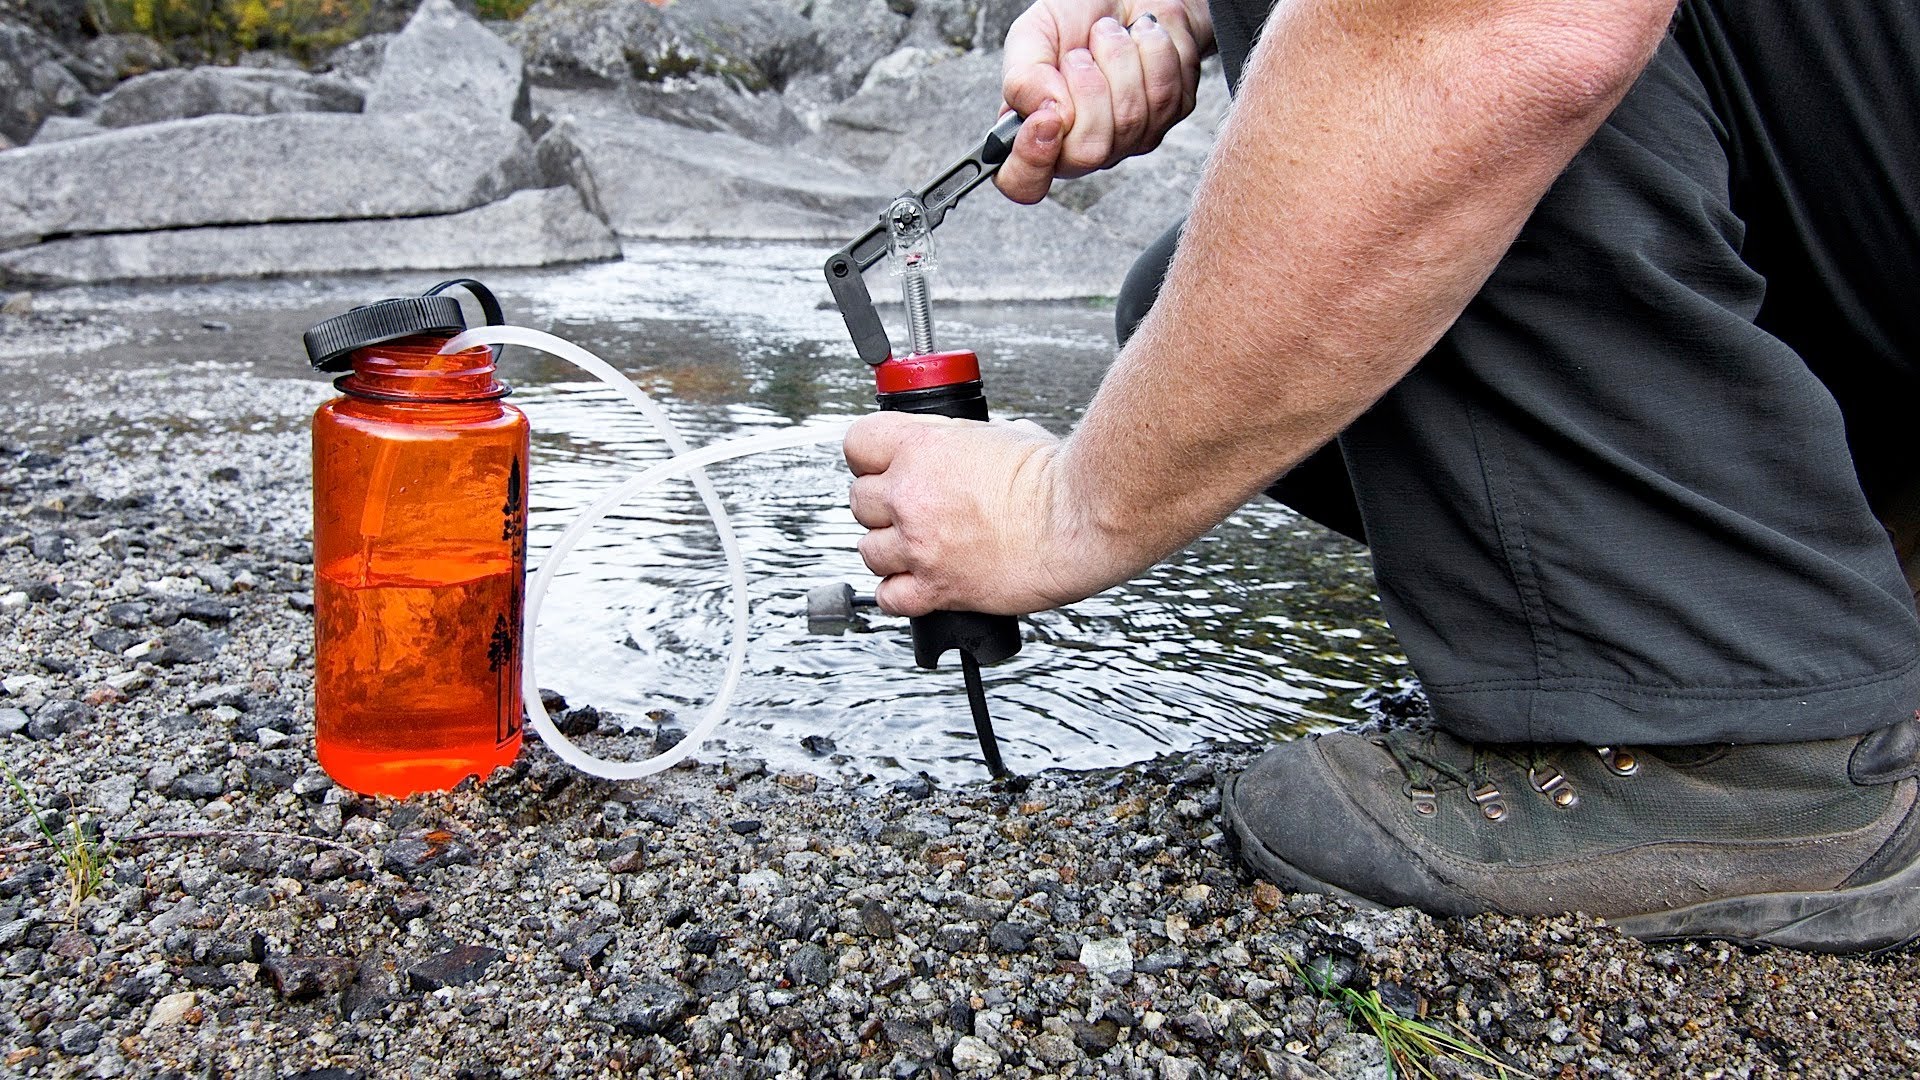 A water filter is a must have for your go bag